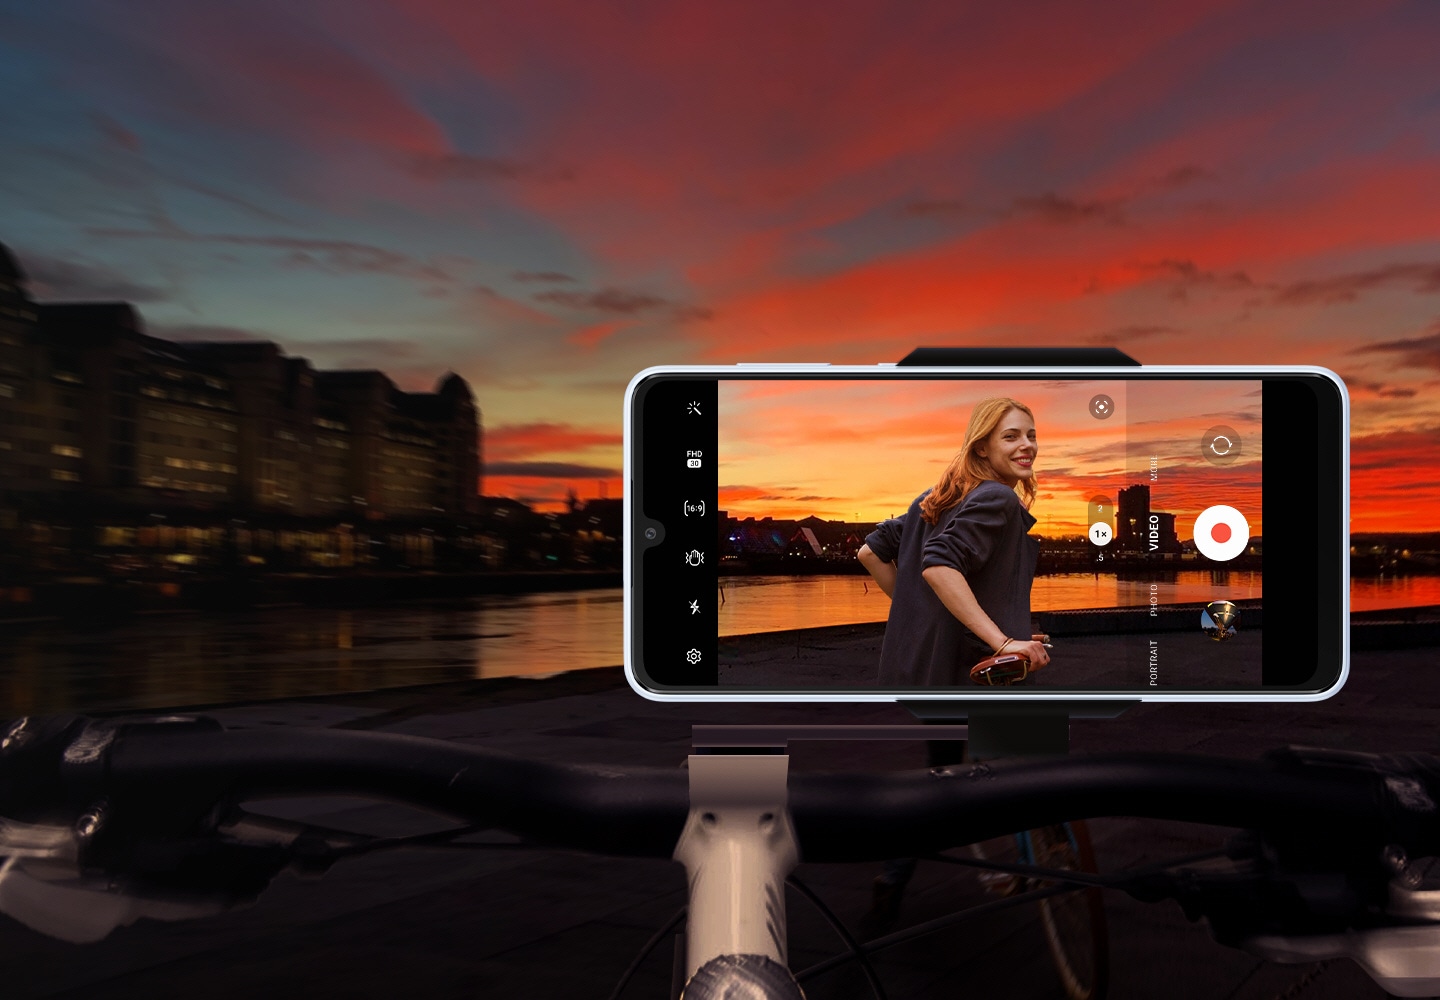 A Galaxy A33 5G is mounted in landscape mode on top of a bicycle handlebar. In the background, a dark and blurry sunset landscape view is shown. On screen, the same landscape is shown more vibrantly with a woman also captured clearly and without blur.